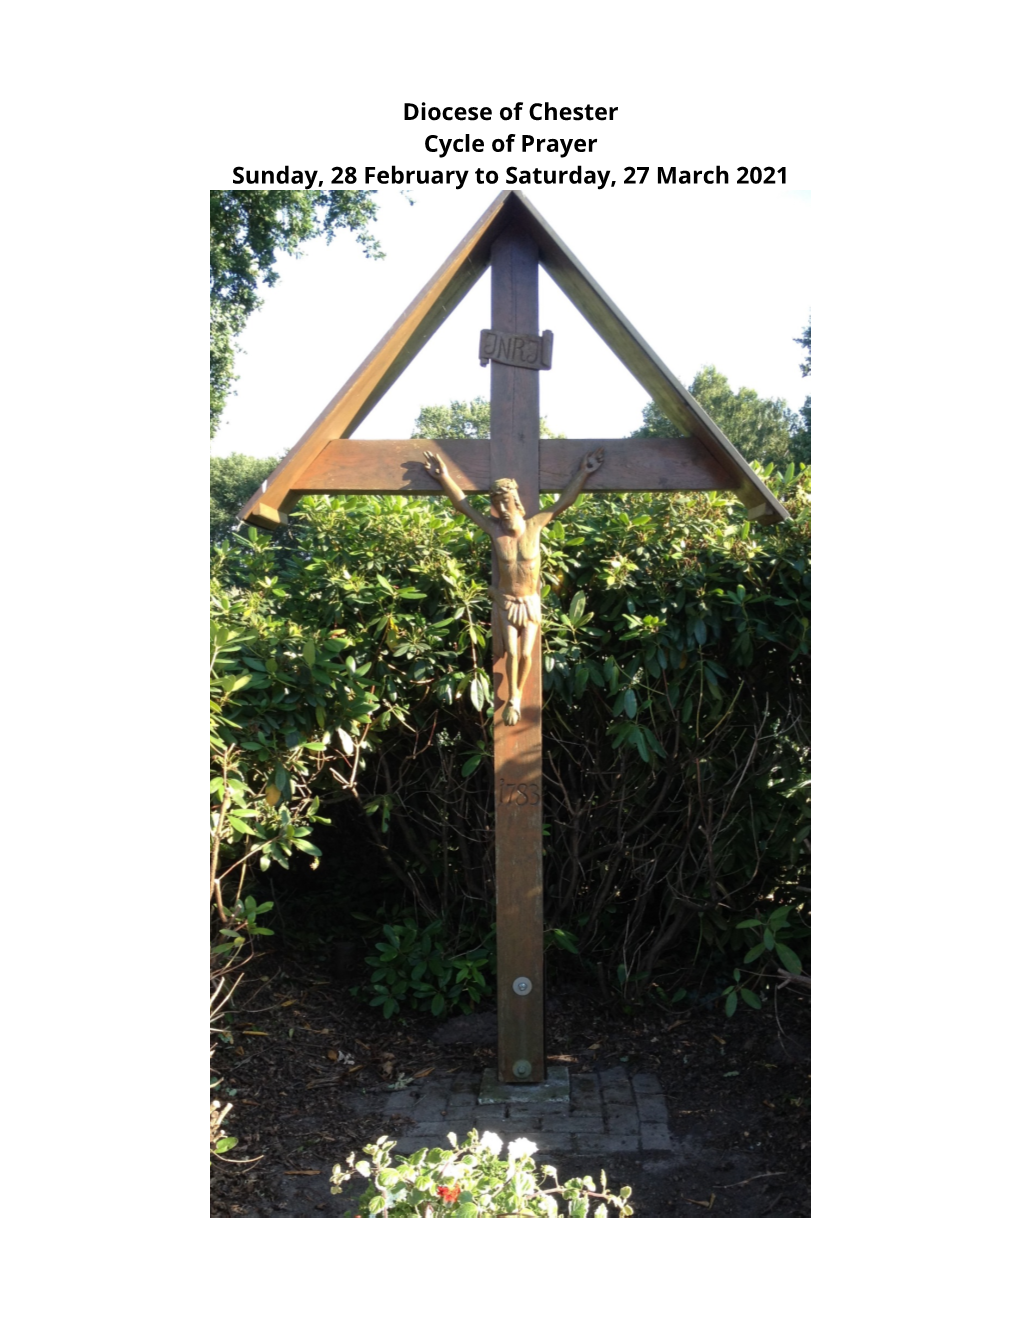 Diocese of Chester Cycle of Prayer Sunday, 28 February to Saturday, 27 March 2021